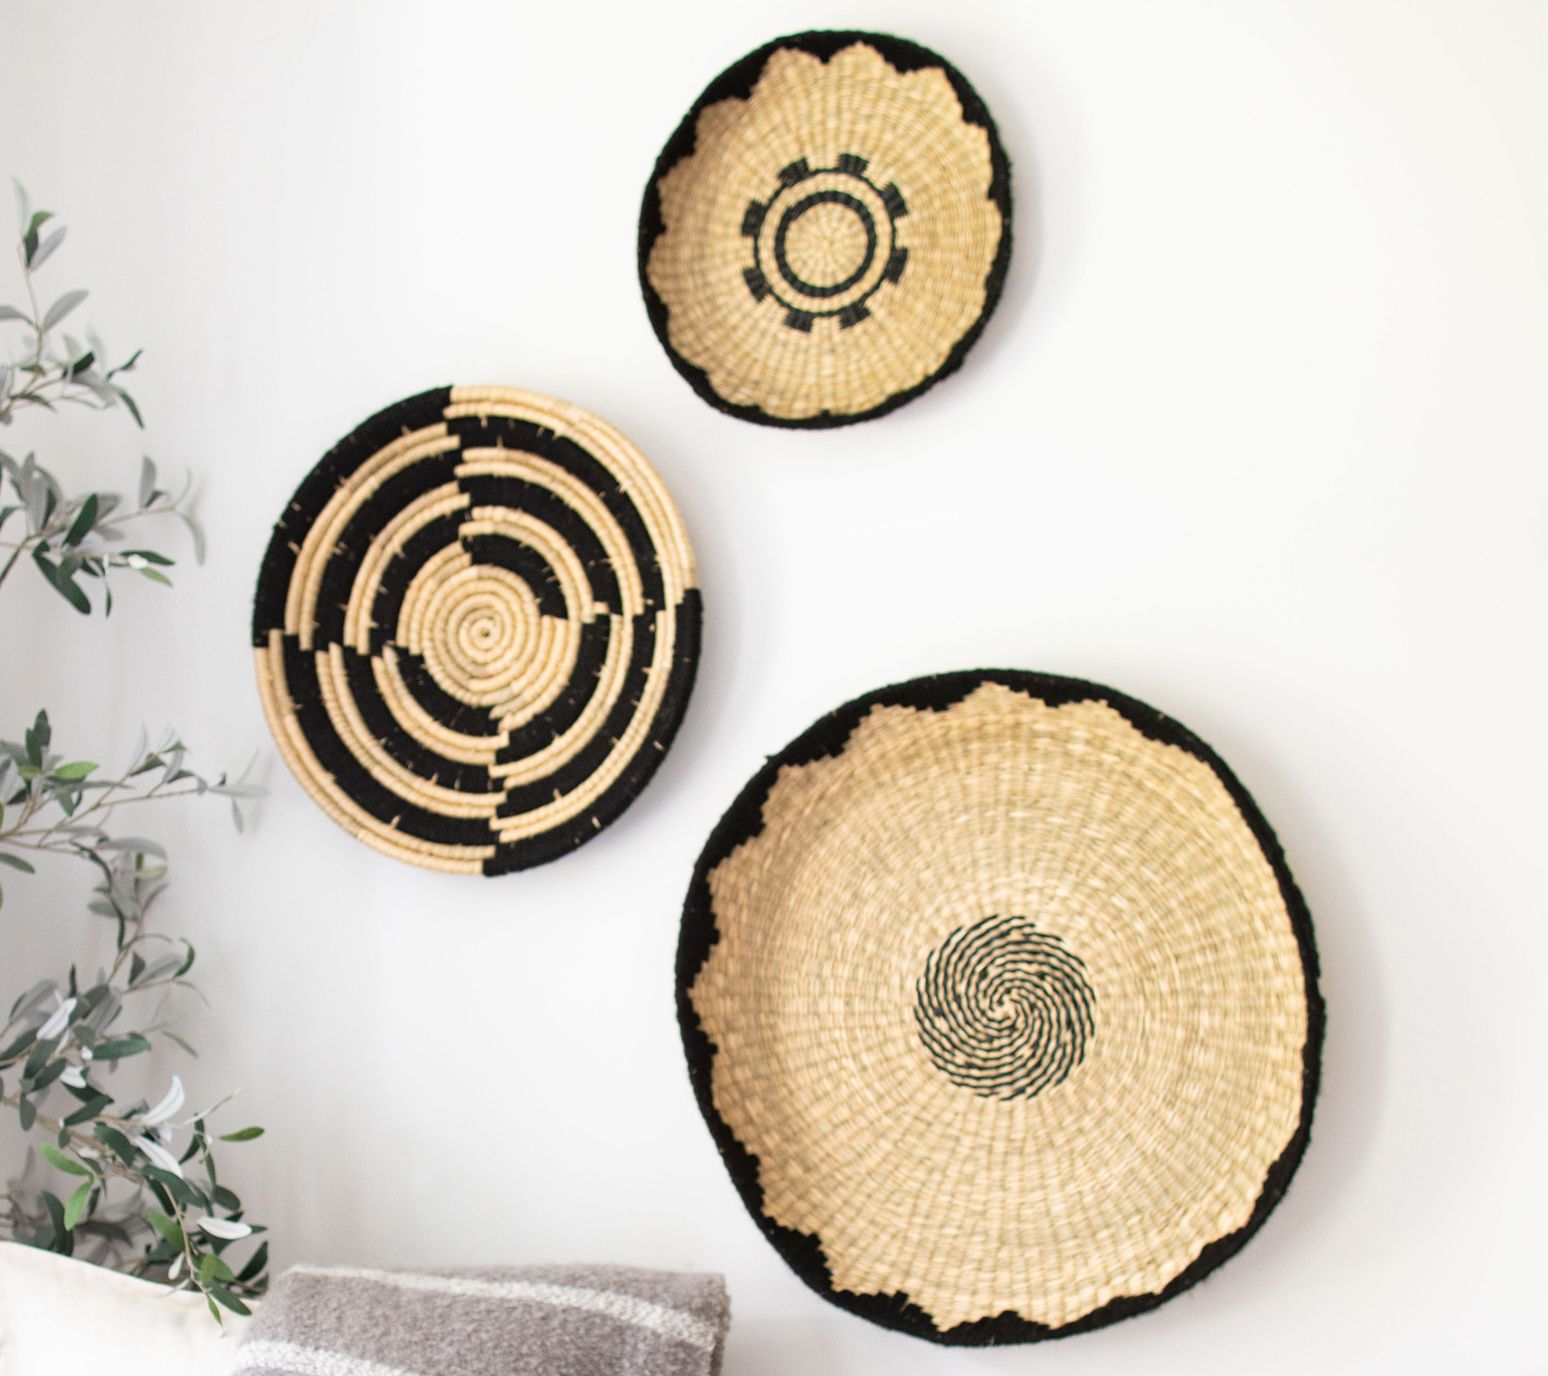 Set of 3 Collapsible Water Hyacinth Baskets by Lauren McBride 